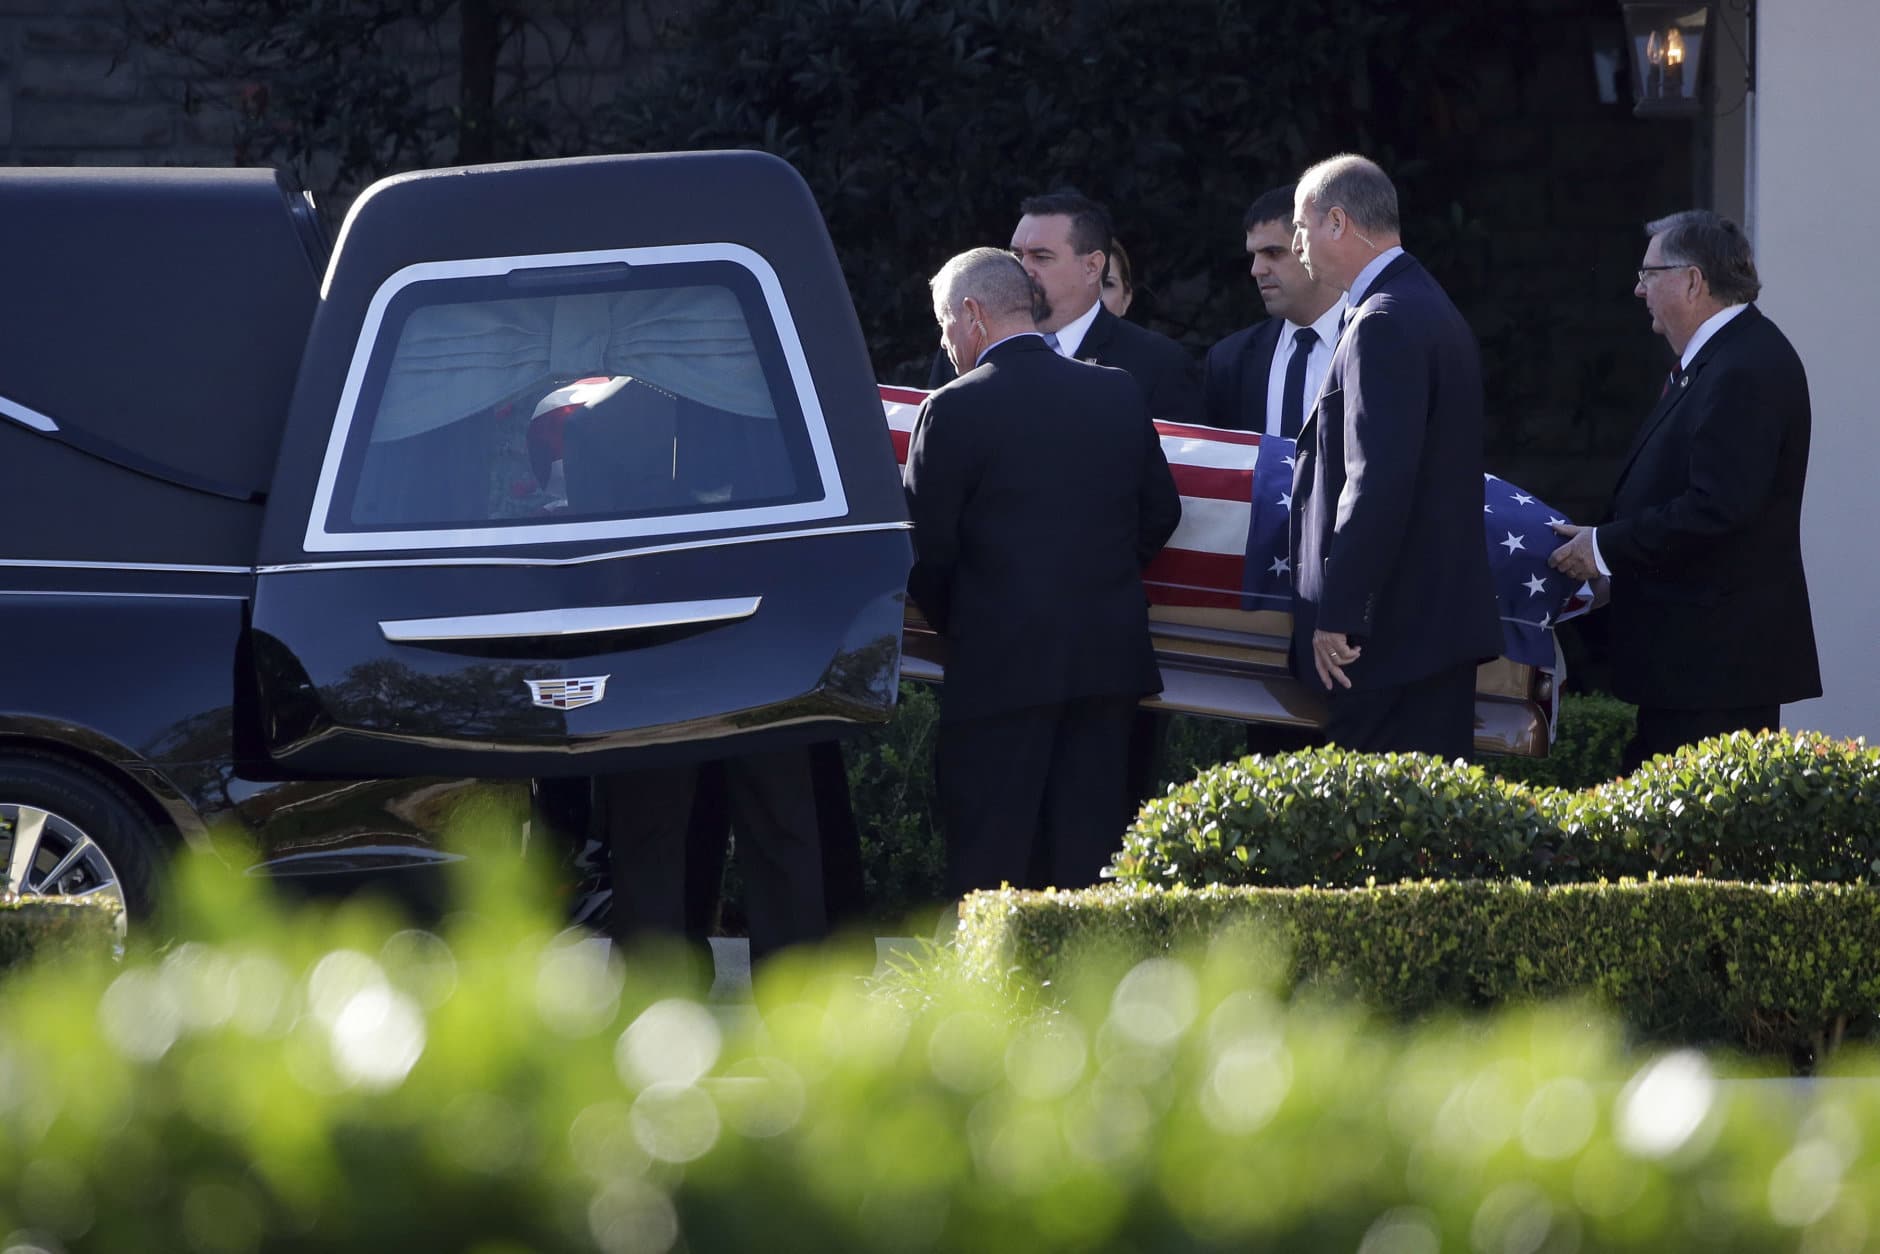 Members of the U.S. Secret Service carry the casket with former President George H. W. Bush to a hearse at George H. Lewis Funeral Home after a family service, Monday, Dec. 3, 2018, in Houston. Monday, Dec. 3, 2018, in Houston. (AP Photo/Kiichiro Sato)